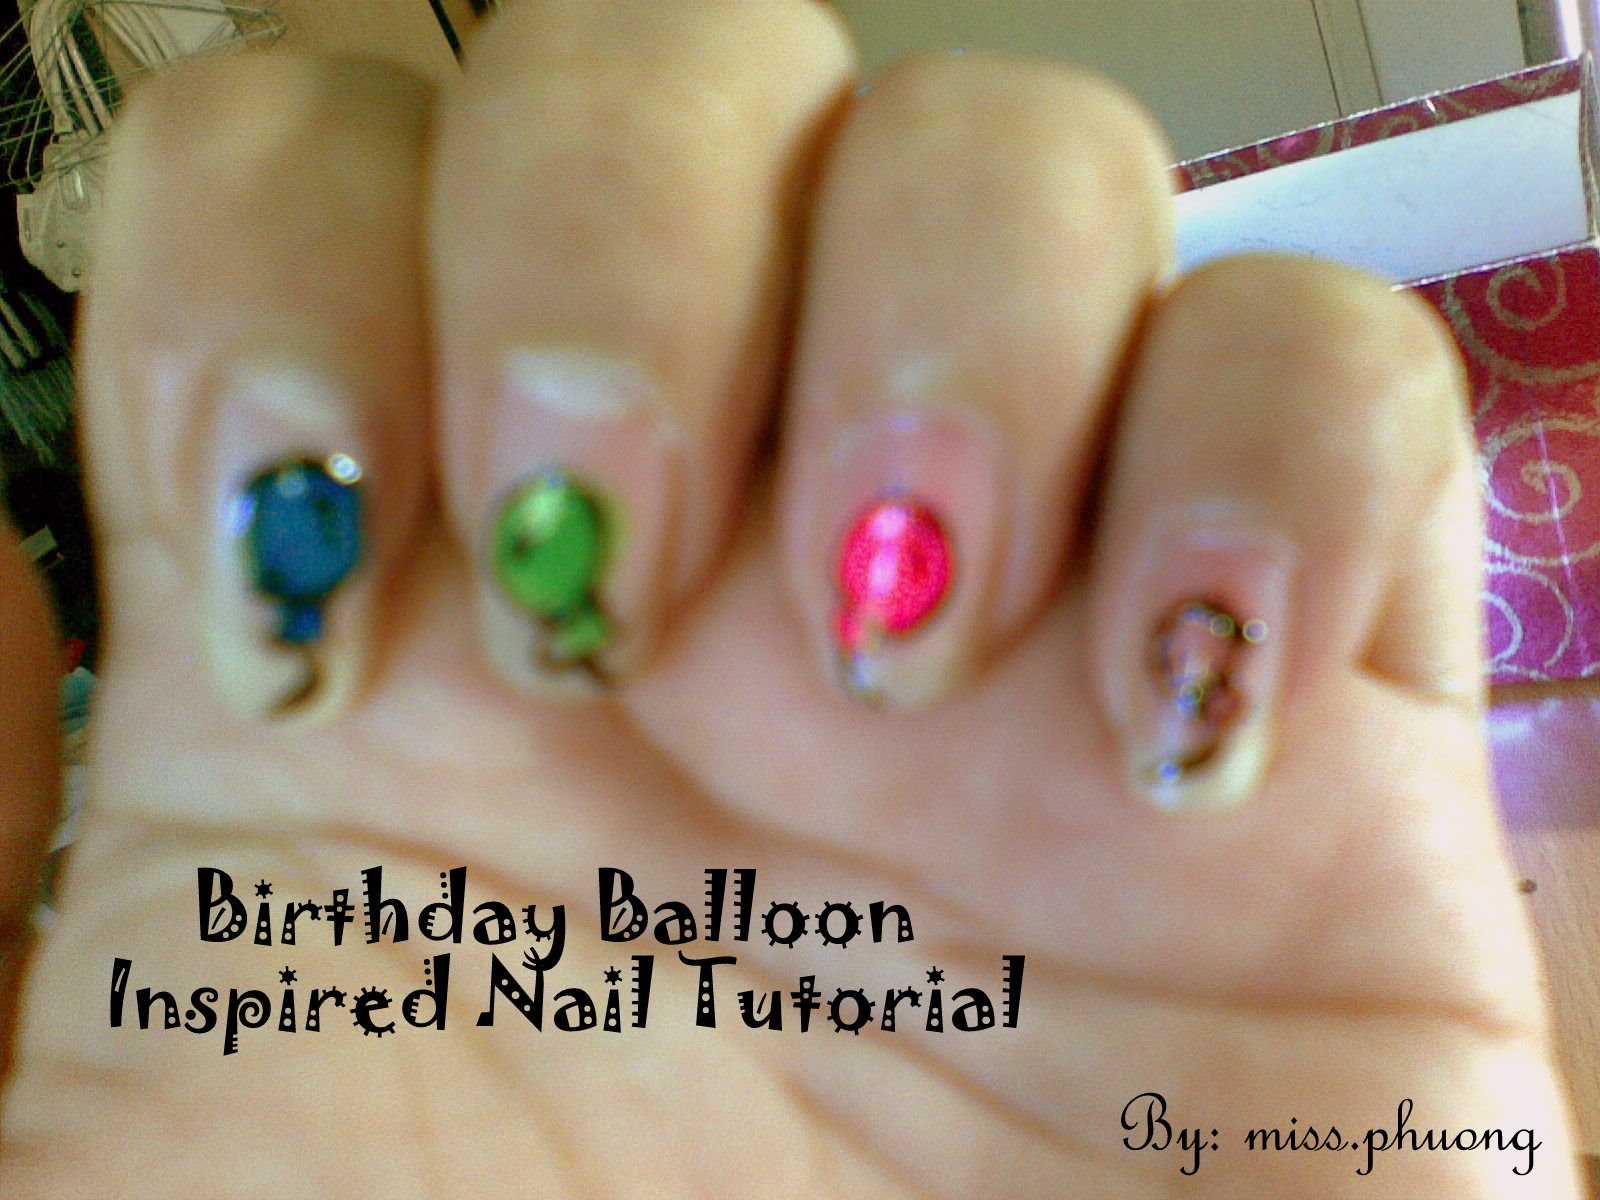 2. Step-by-Step Balloon Nail Art Tutorial - wide 2